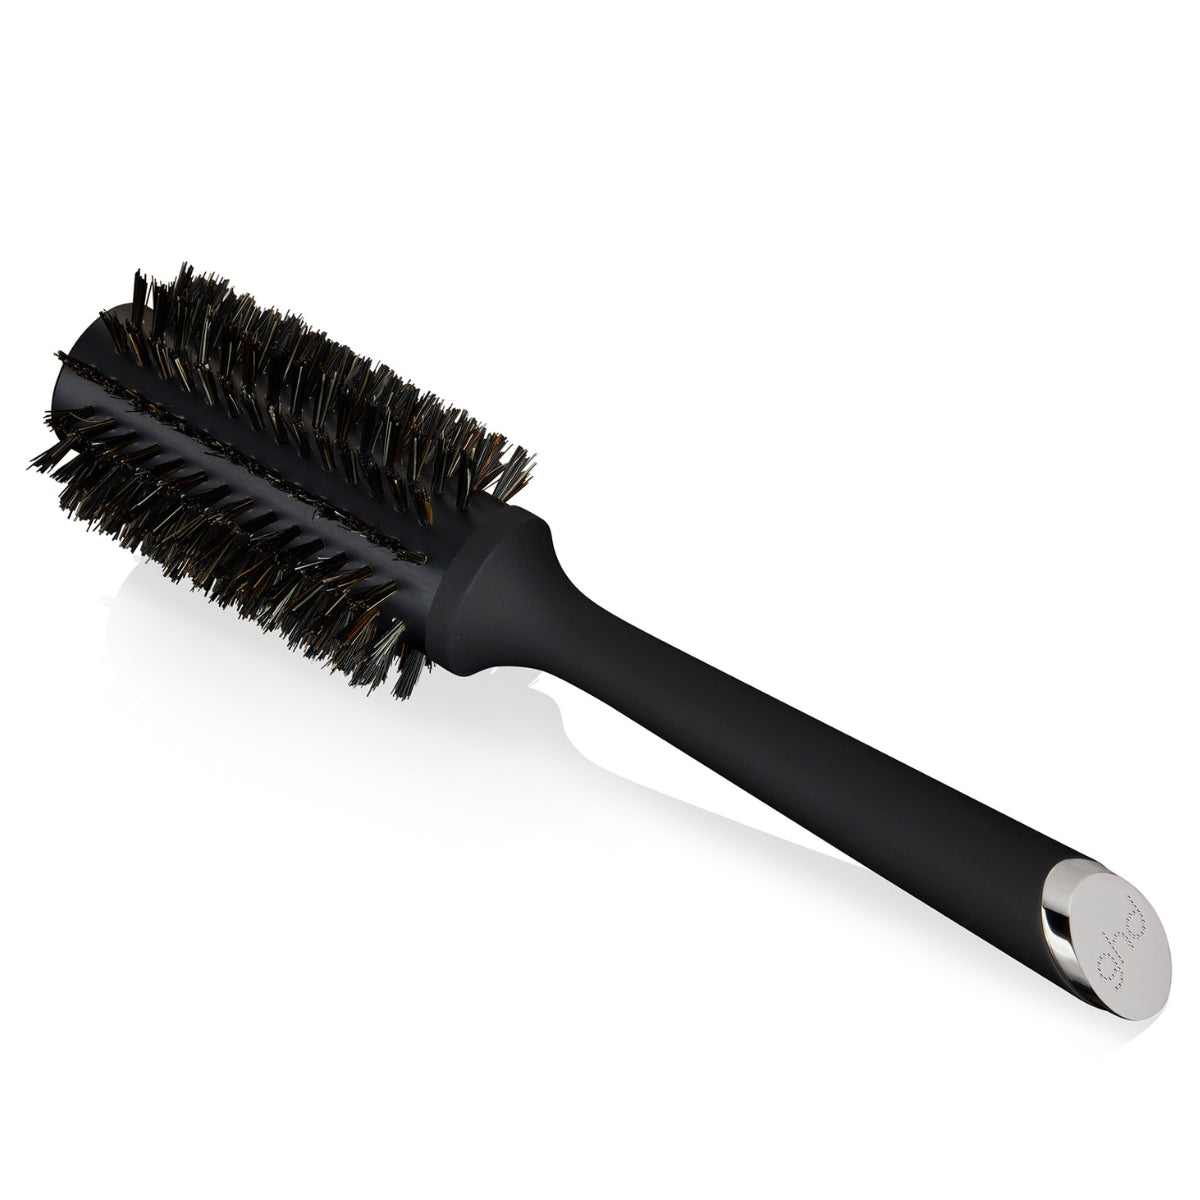 Ghd The Smoother - Natural Bristle Radial Hair Brush (35mm)